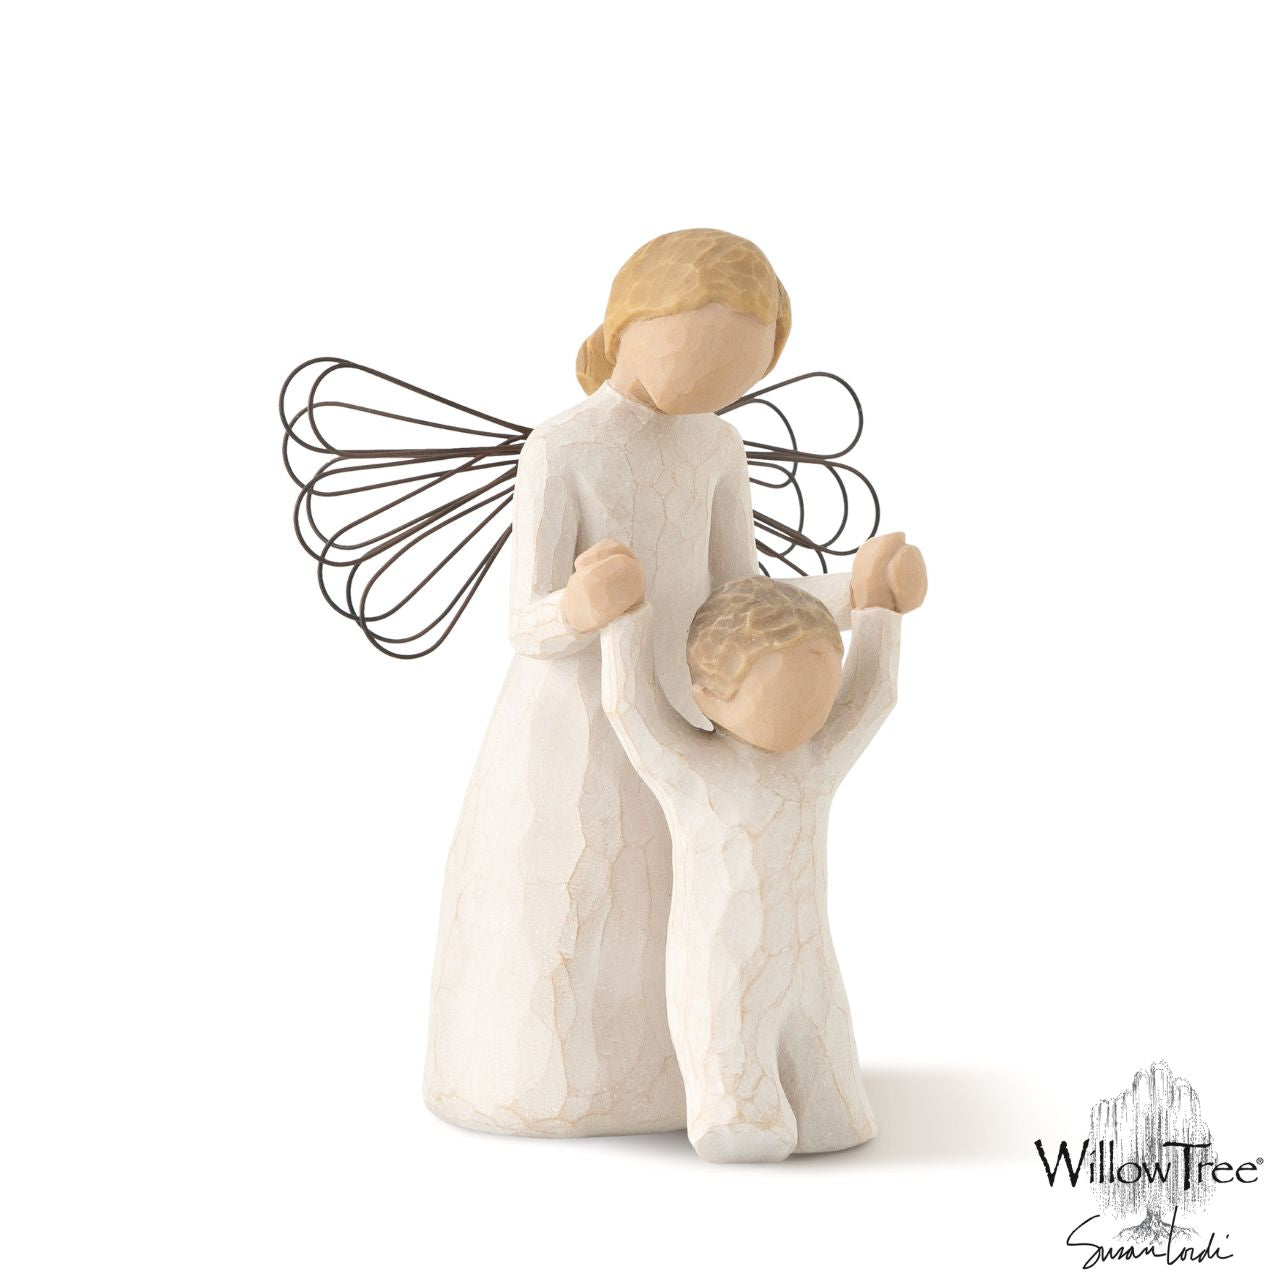 Guardian Angel by Willow Tree  Willow Tree is an intimate line of figurative sculptures representing sentiments of love, closeness, healing, courage, hope...all the emotions we encounter in life. Artist Susan Lordi hand carves the original of each Willow Tree sculpture.